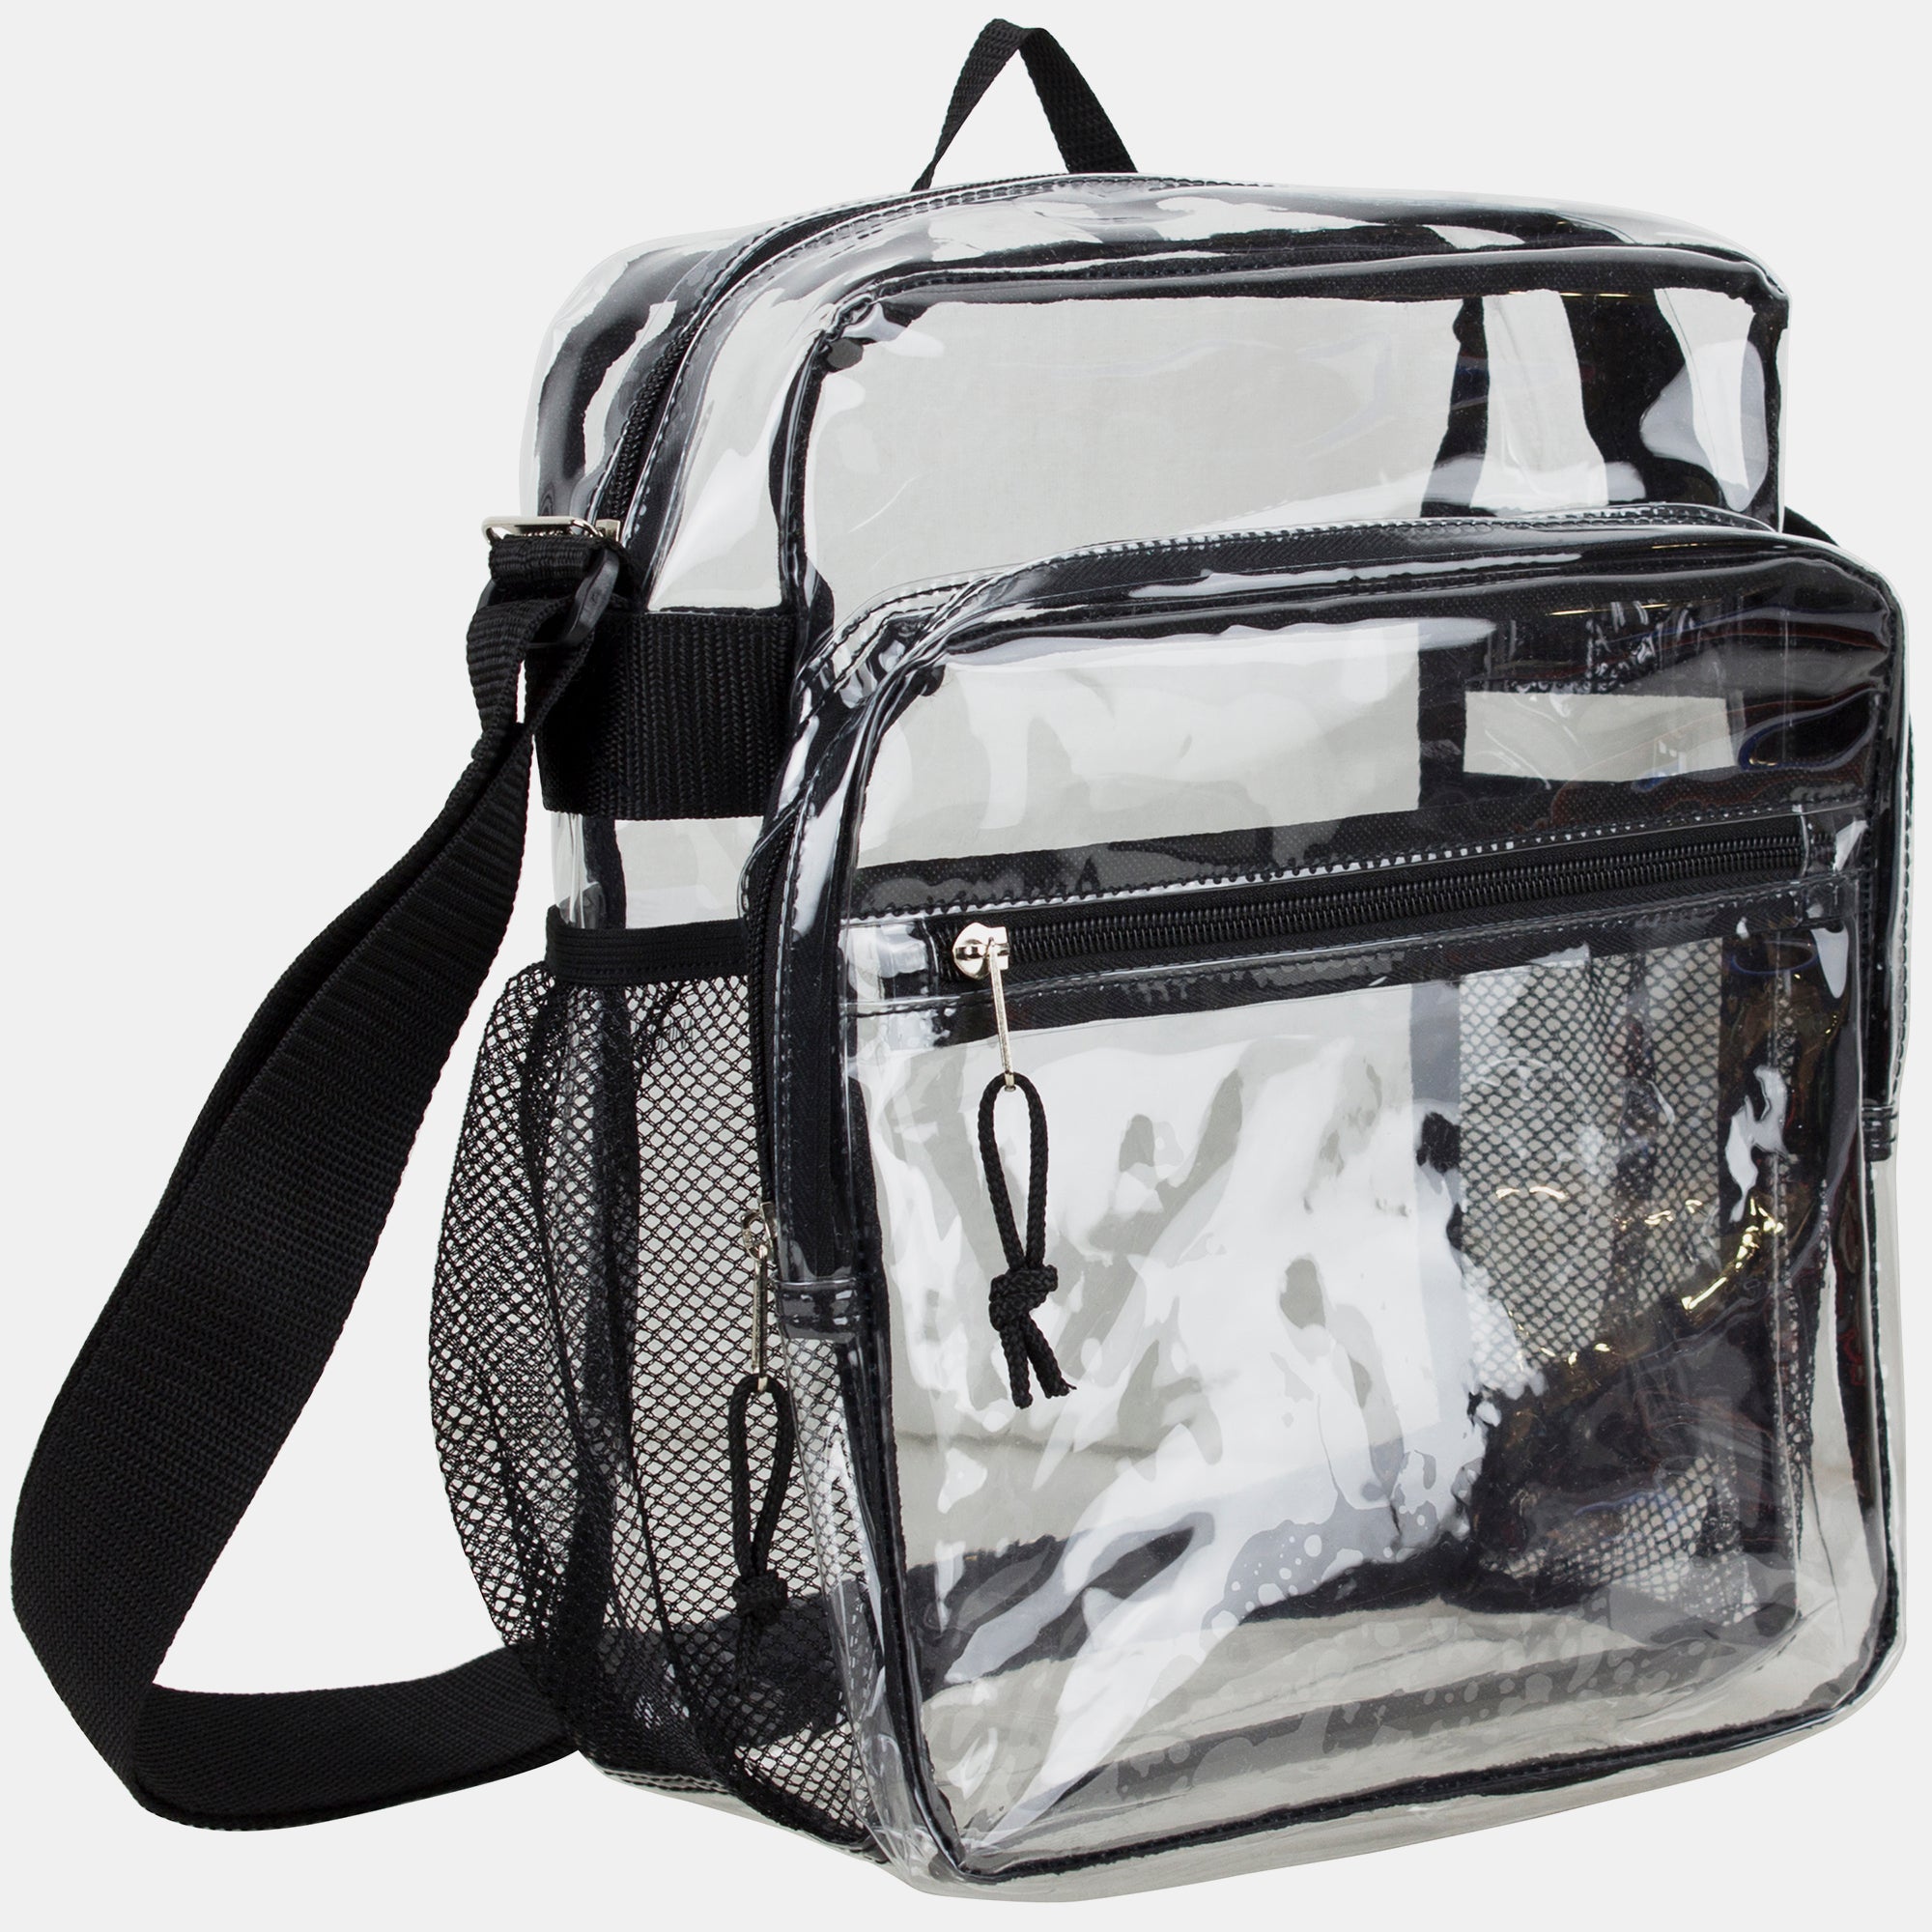 Clear Stadium Bag - White Trim - Grace and Lace